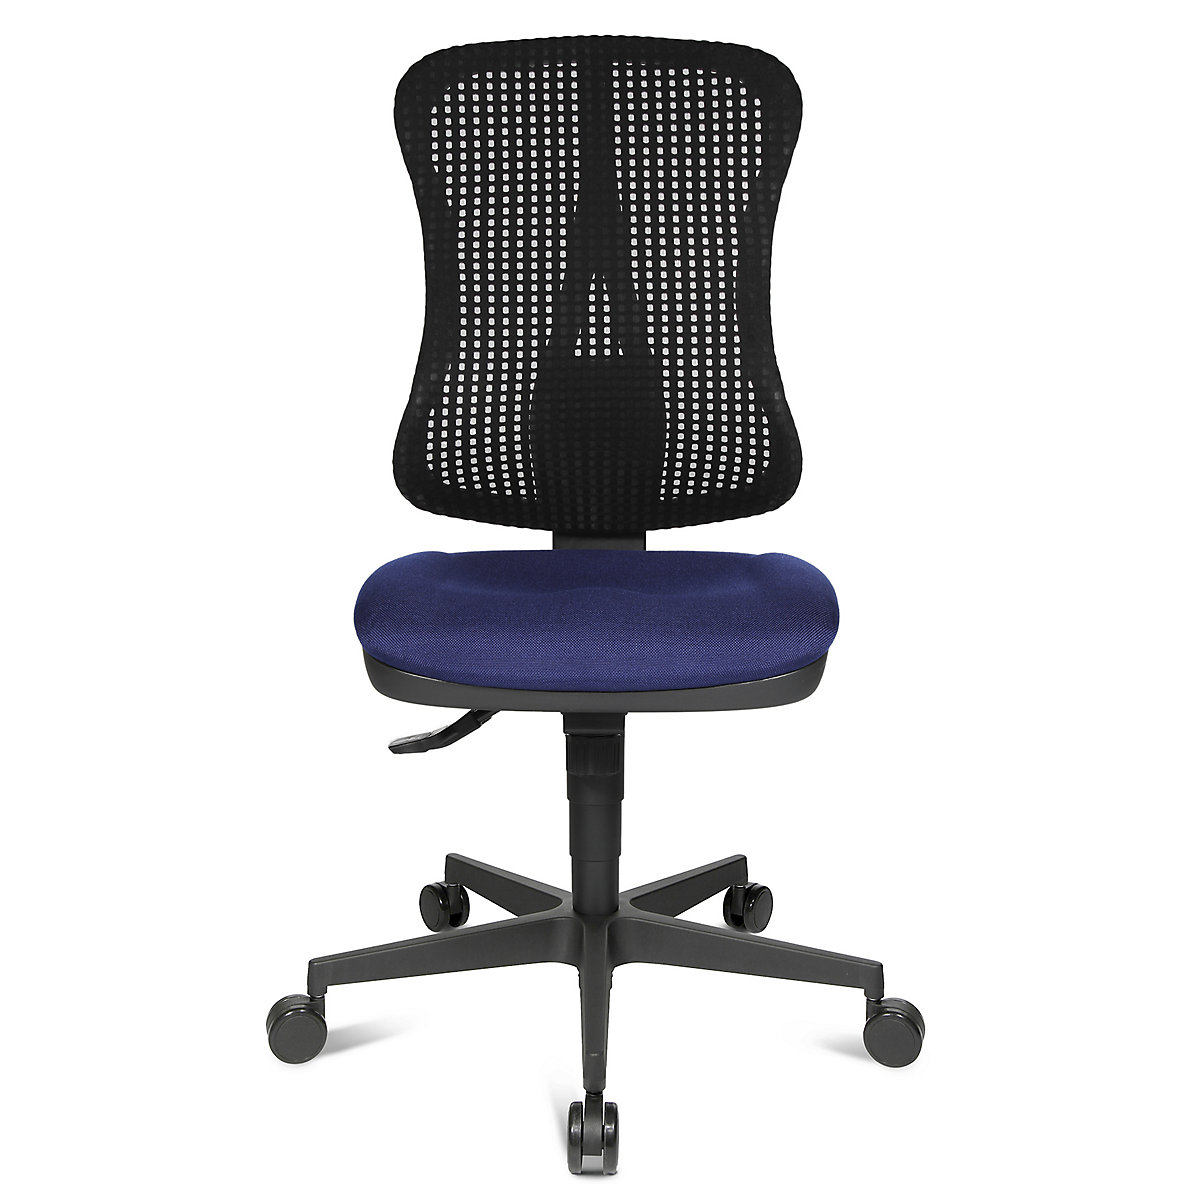 Ergonomic swivel chair, contoured seat – Topstar, without arm rests, blue seat, black mesh back rest-10